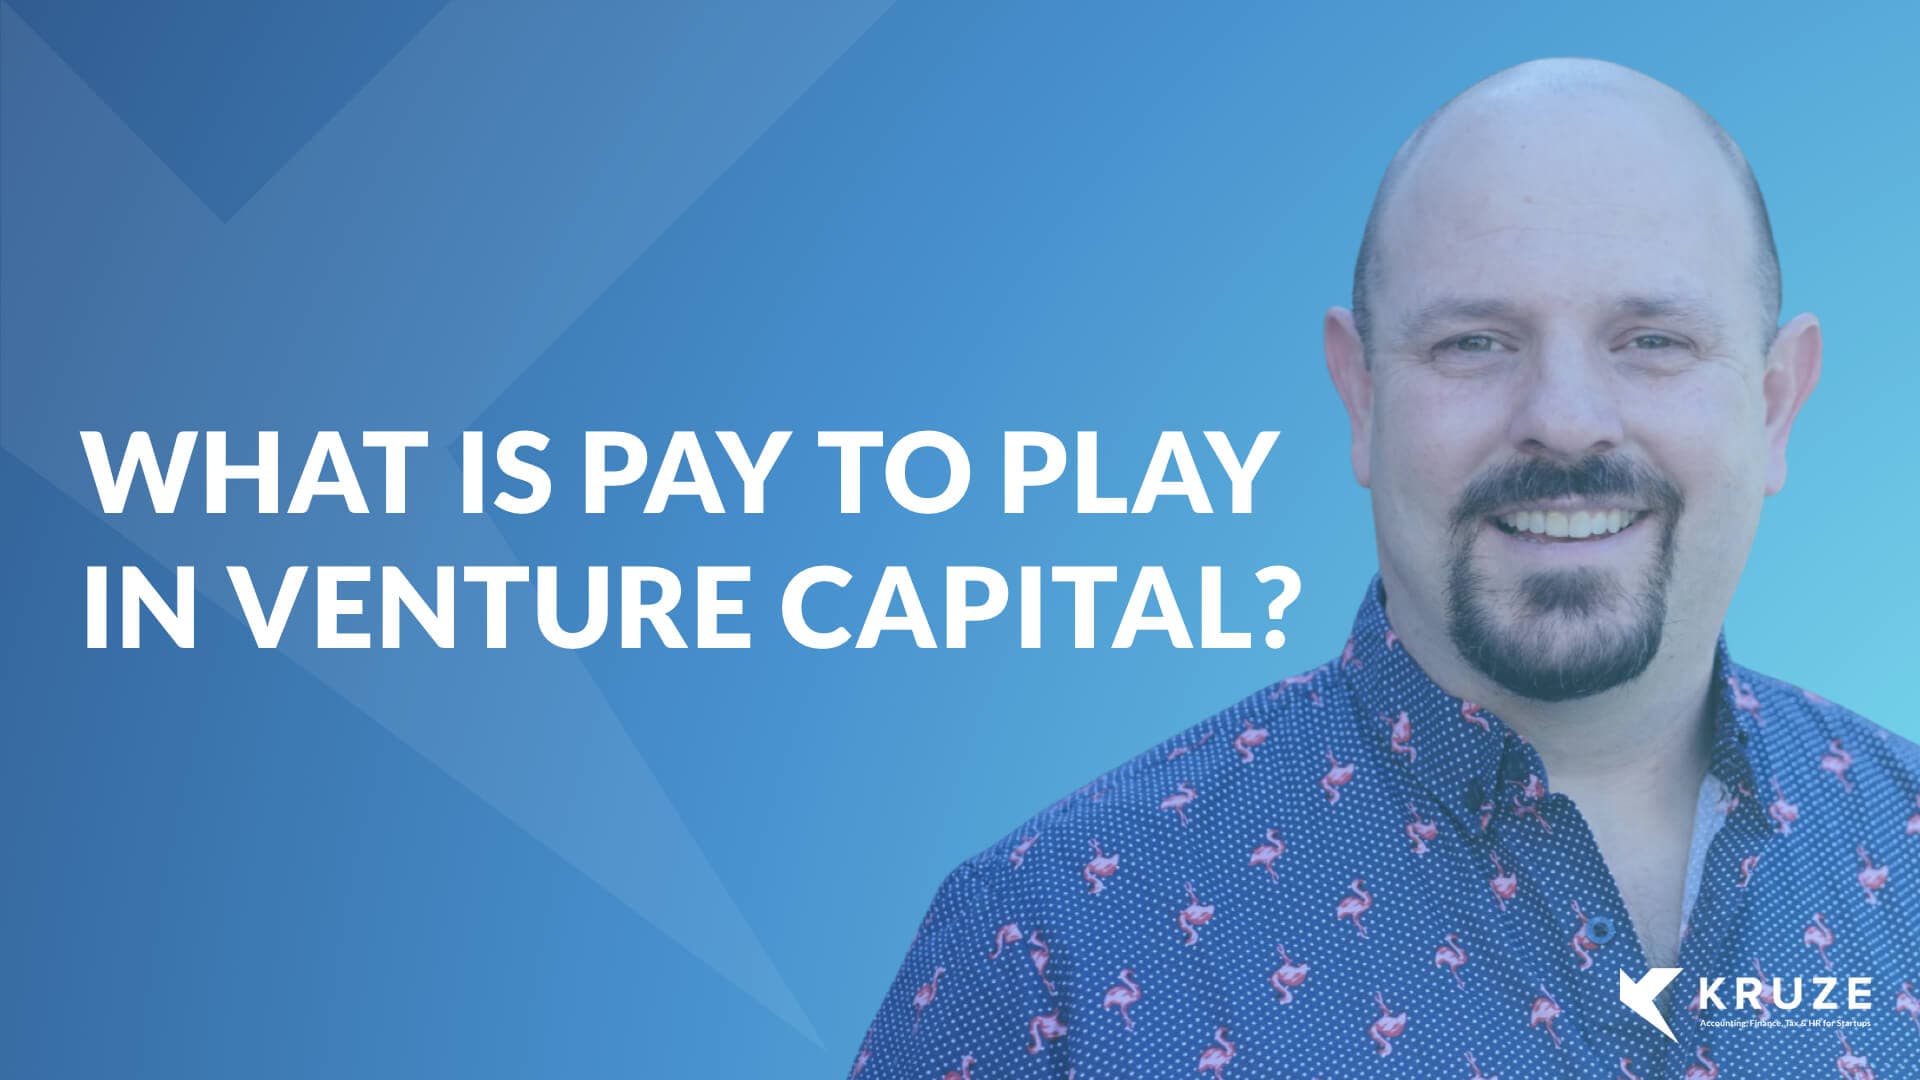 Pay to play in venture capital